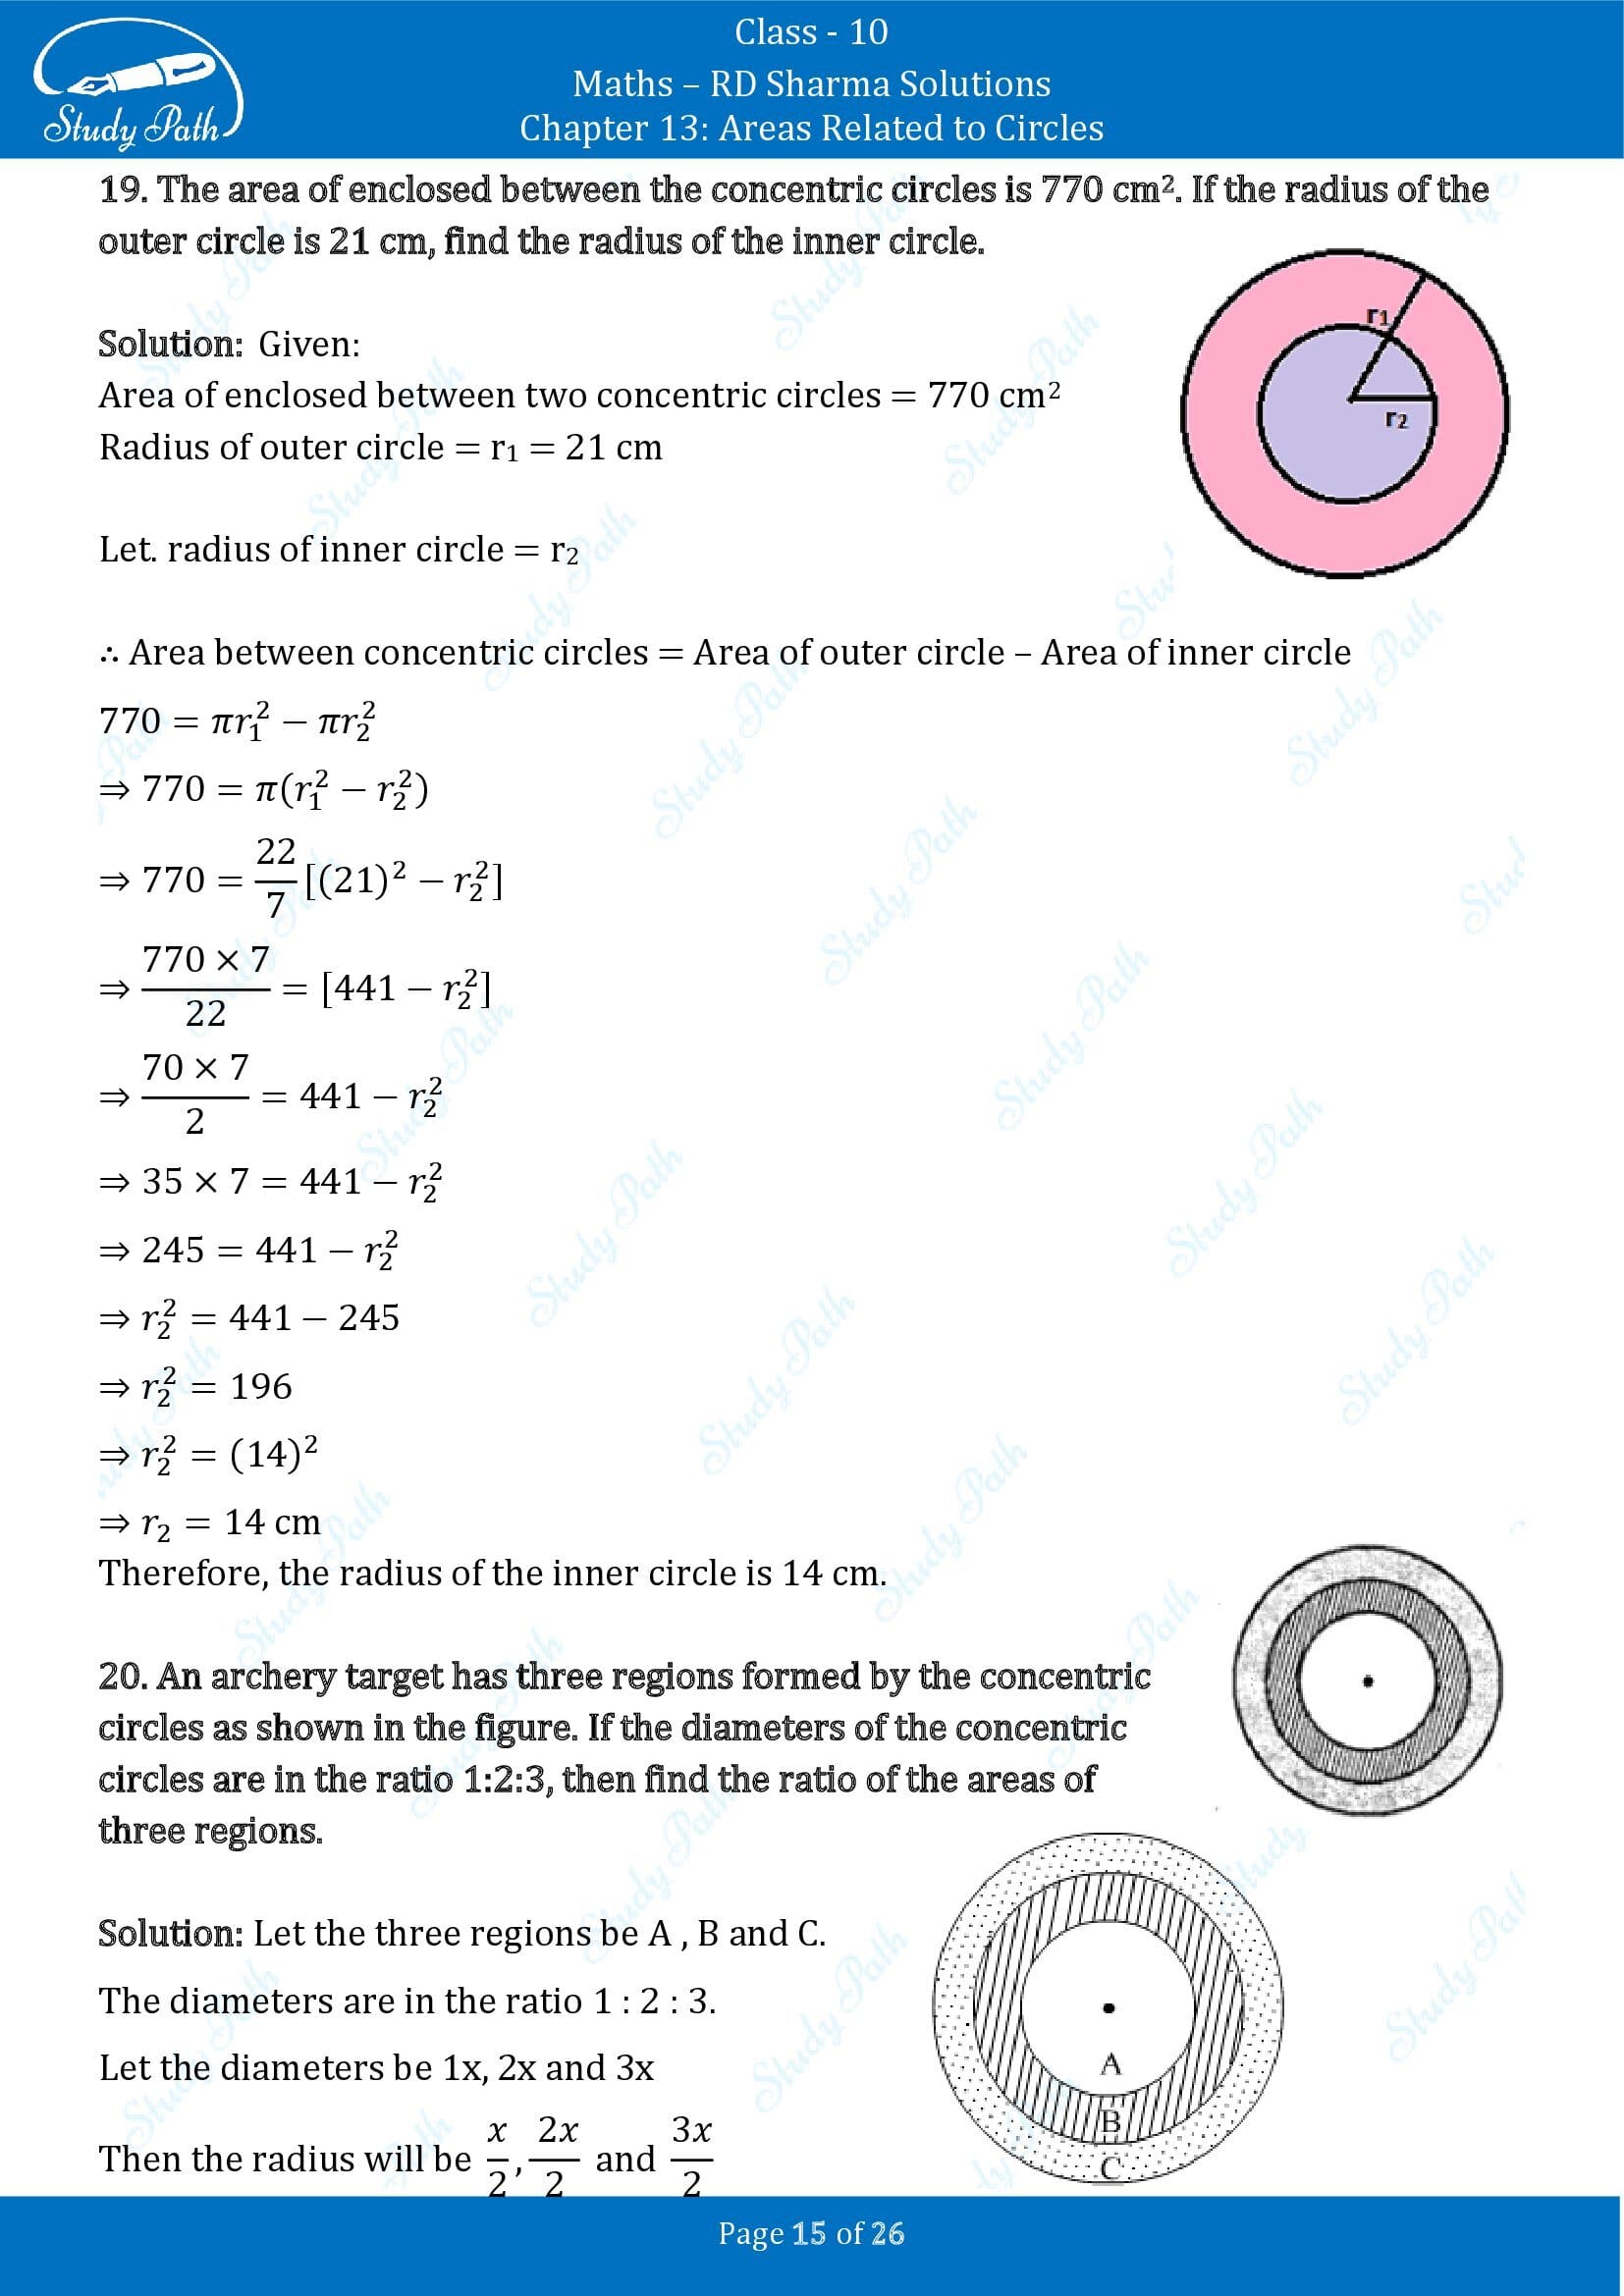 RD Sharma Solutions Class 10 Chapter 13 Areas Related to Circles Exercise 13.1 00015